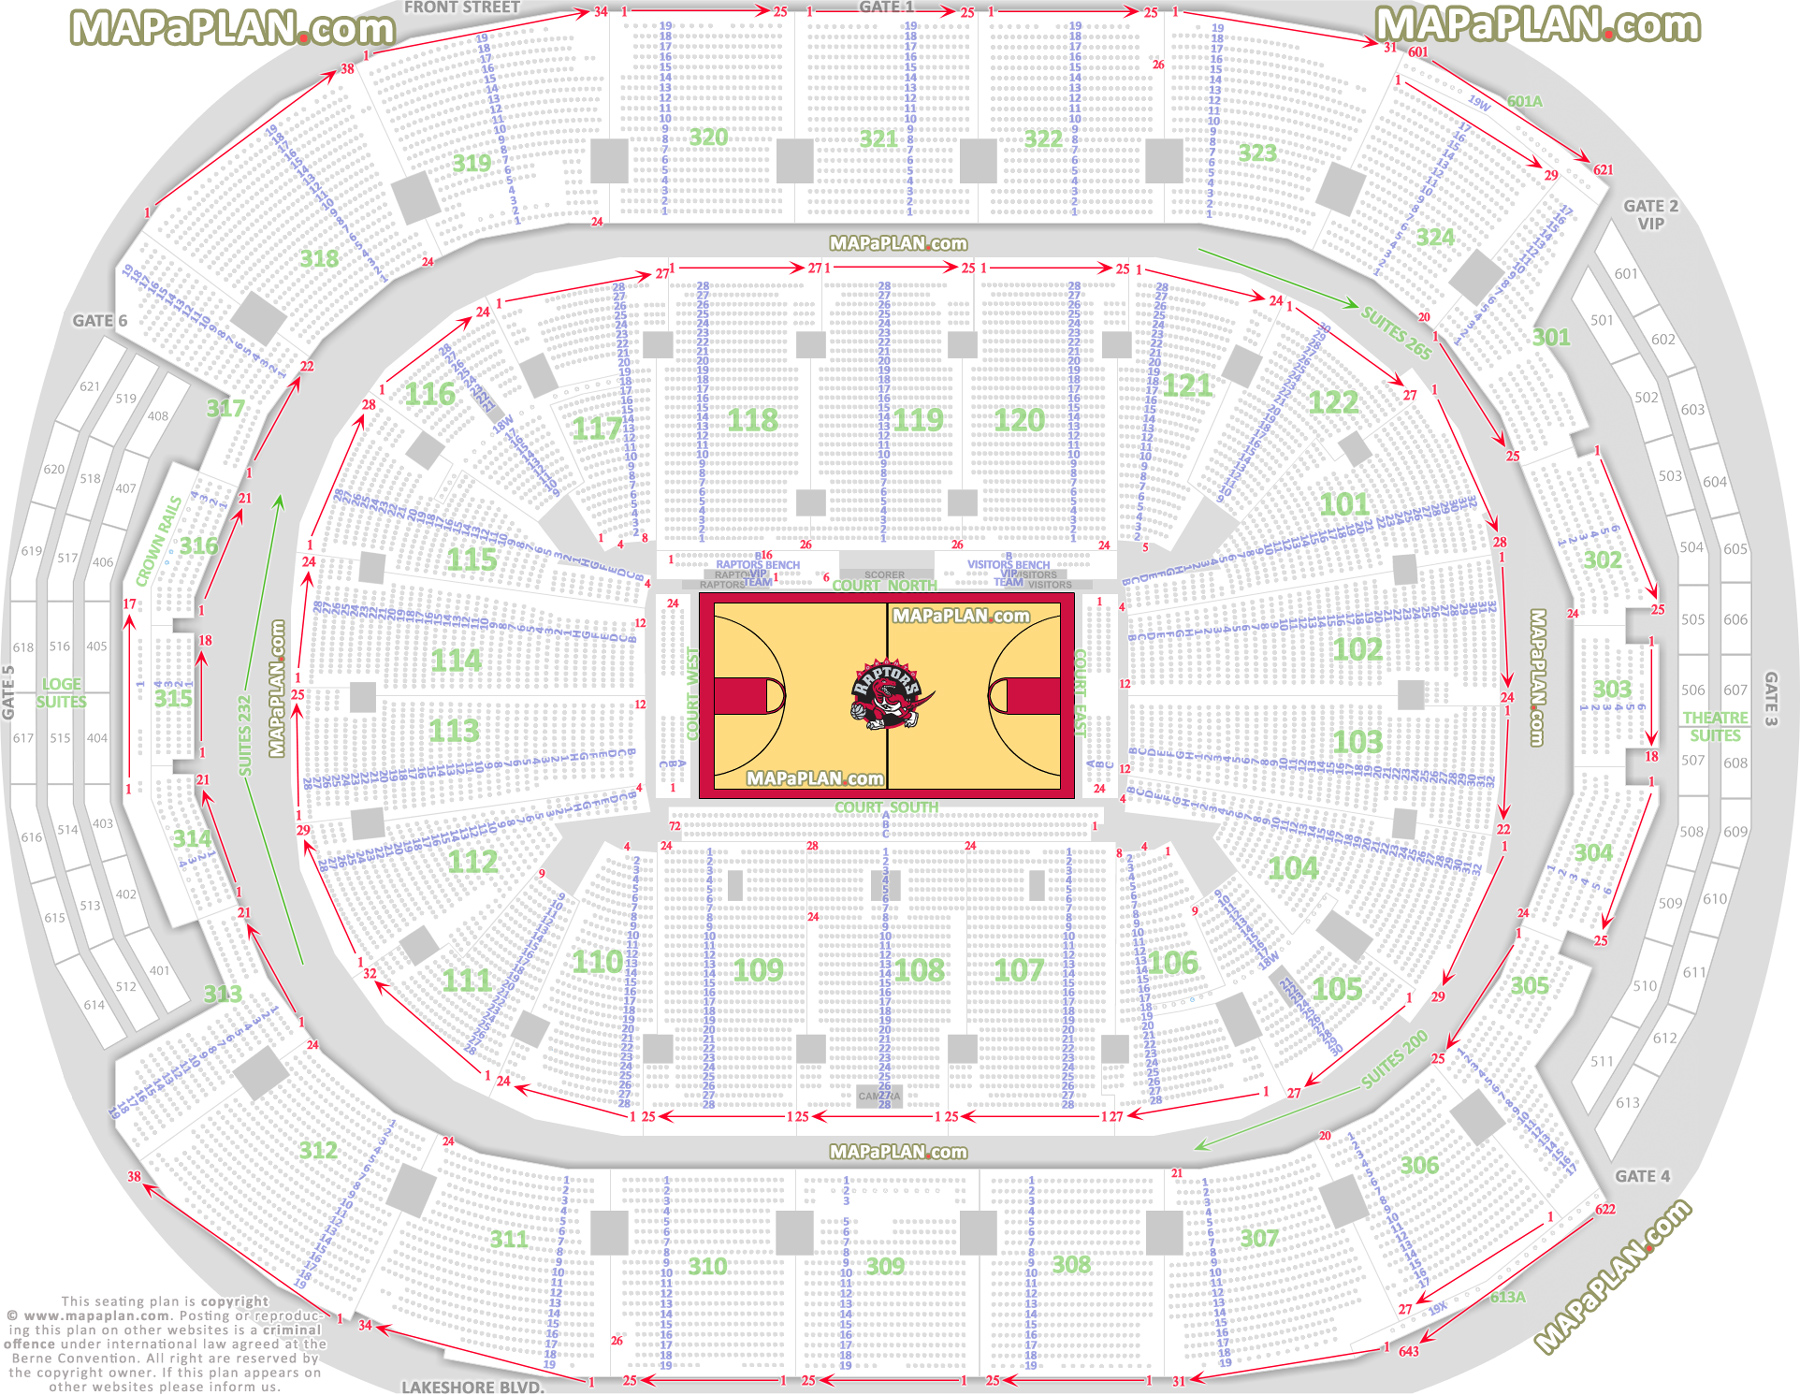 Toronto Air Canada Centre Nba Toronto Raptors Basketball Game Seat Row Numbers Plan With Executive Loge Theatre Suites